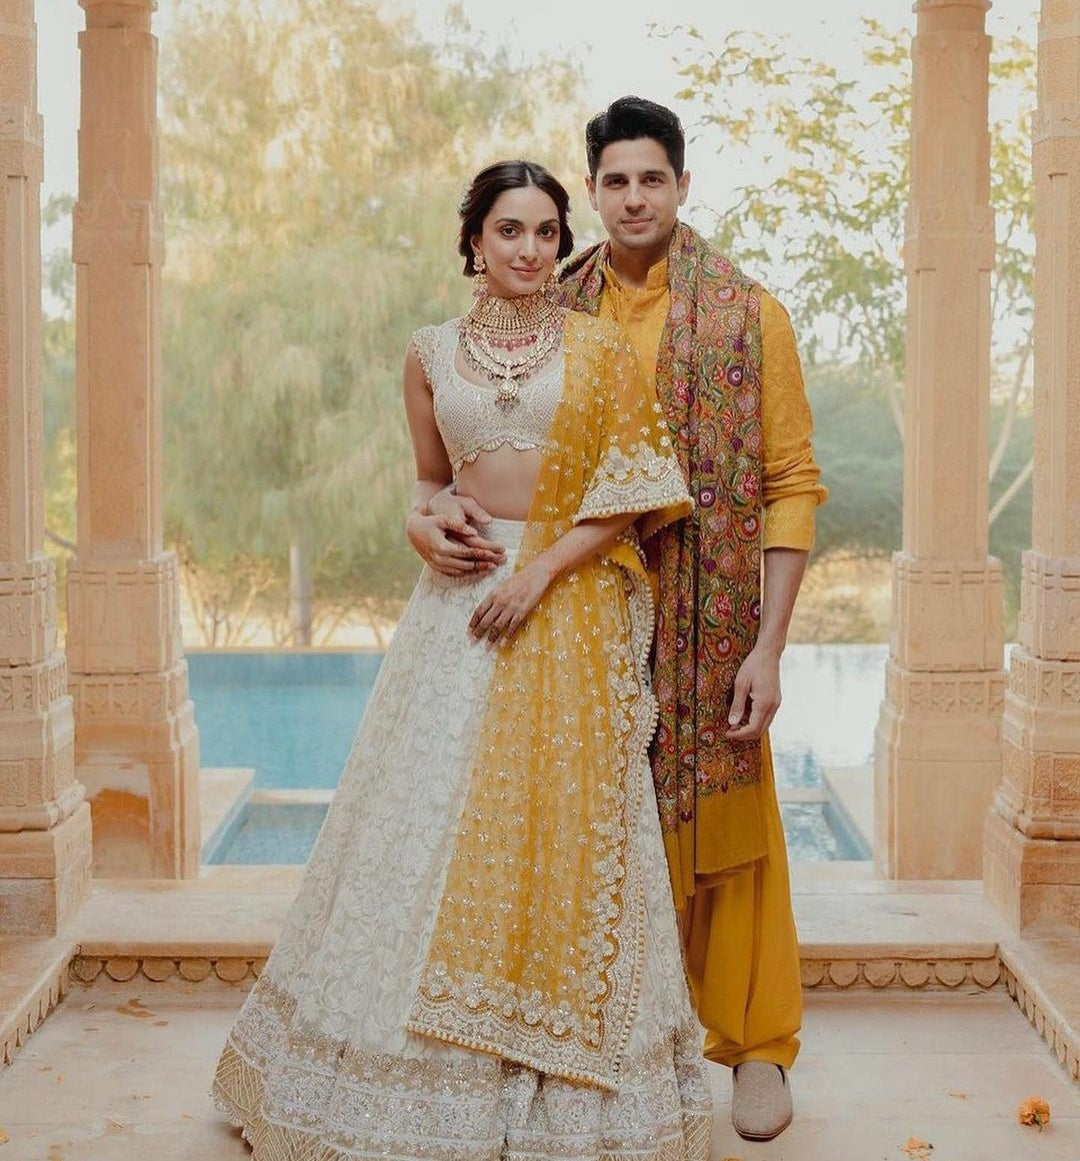 Tracking Jewelry Trends from the #SidKiara Wedding